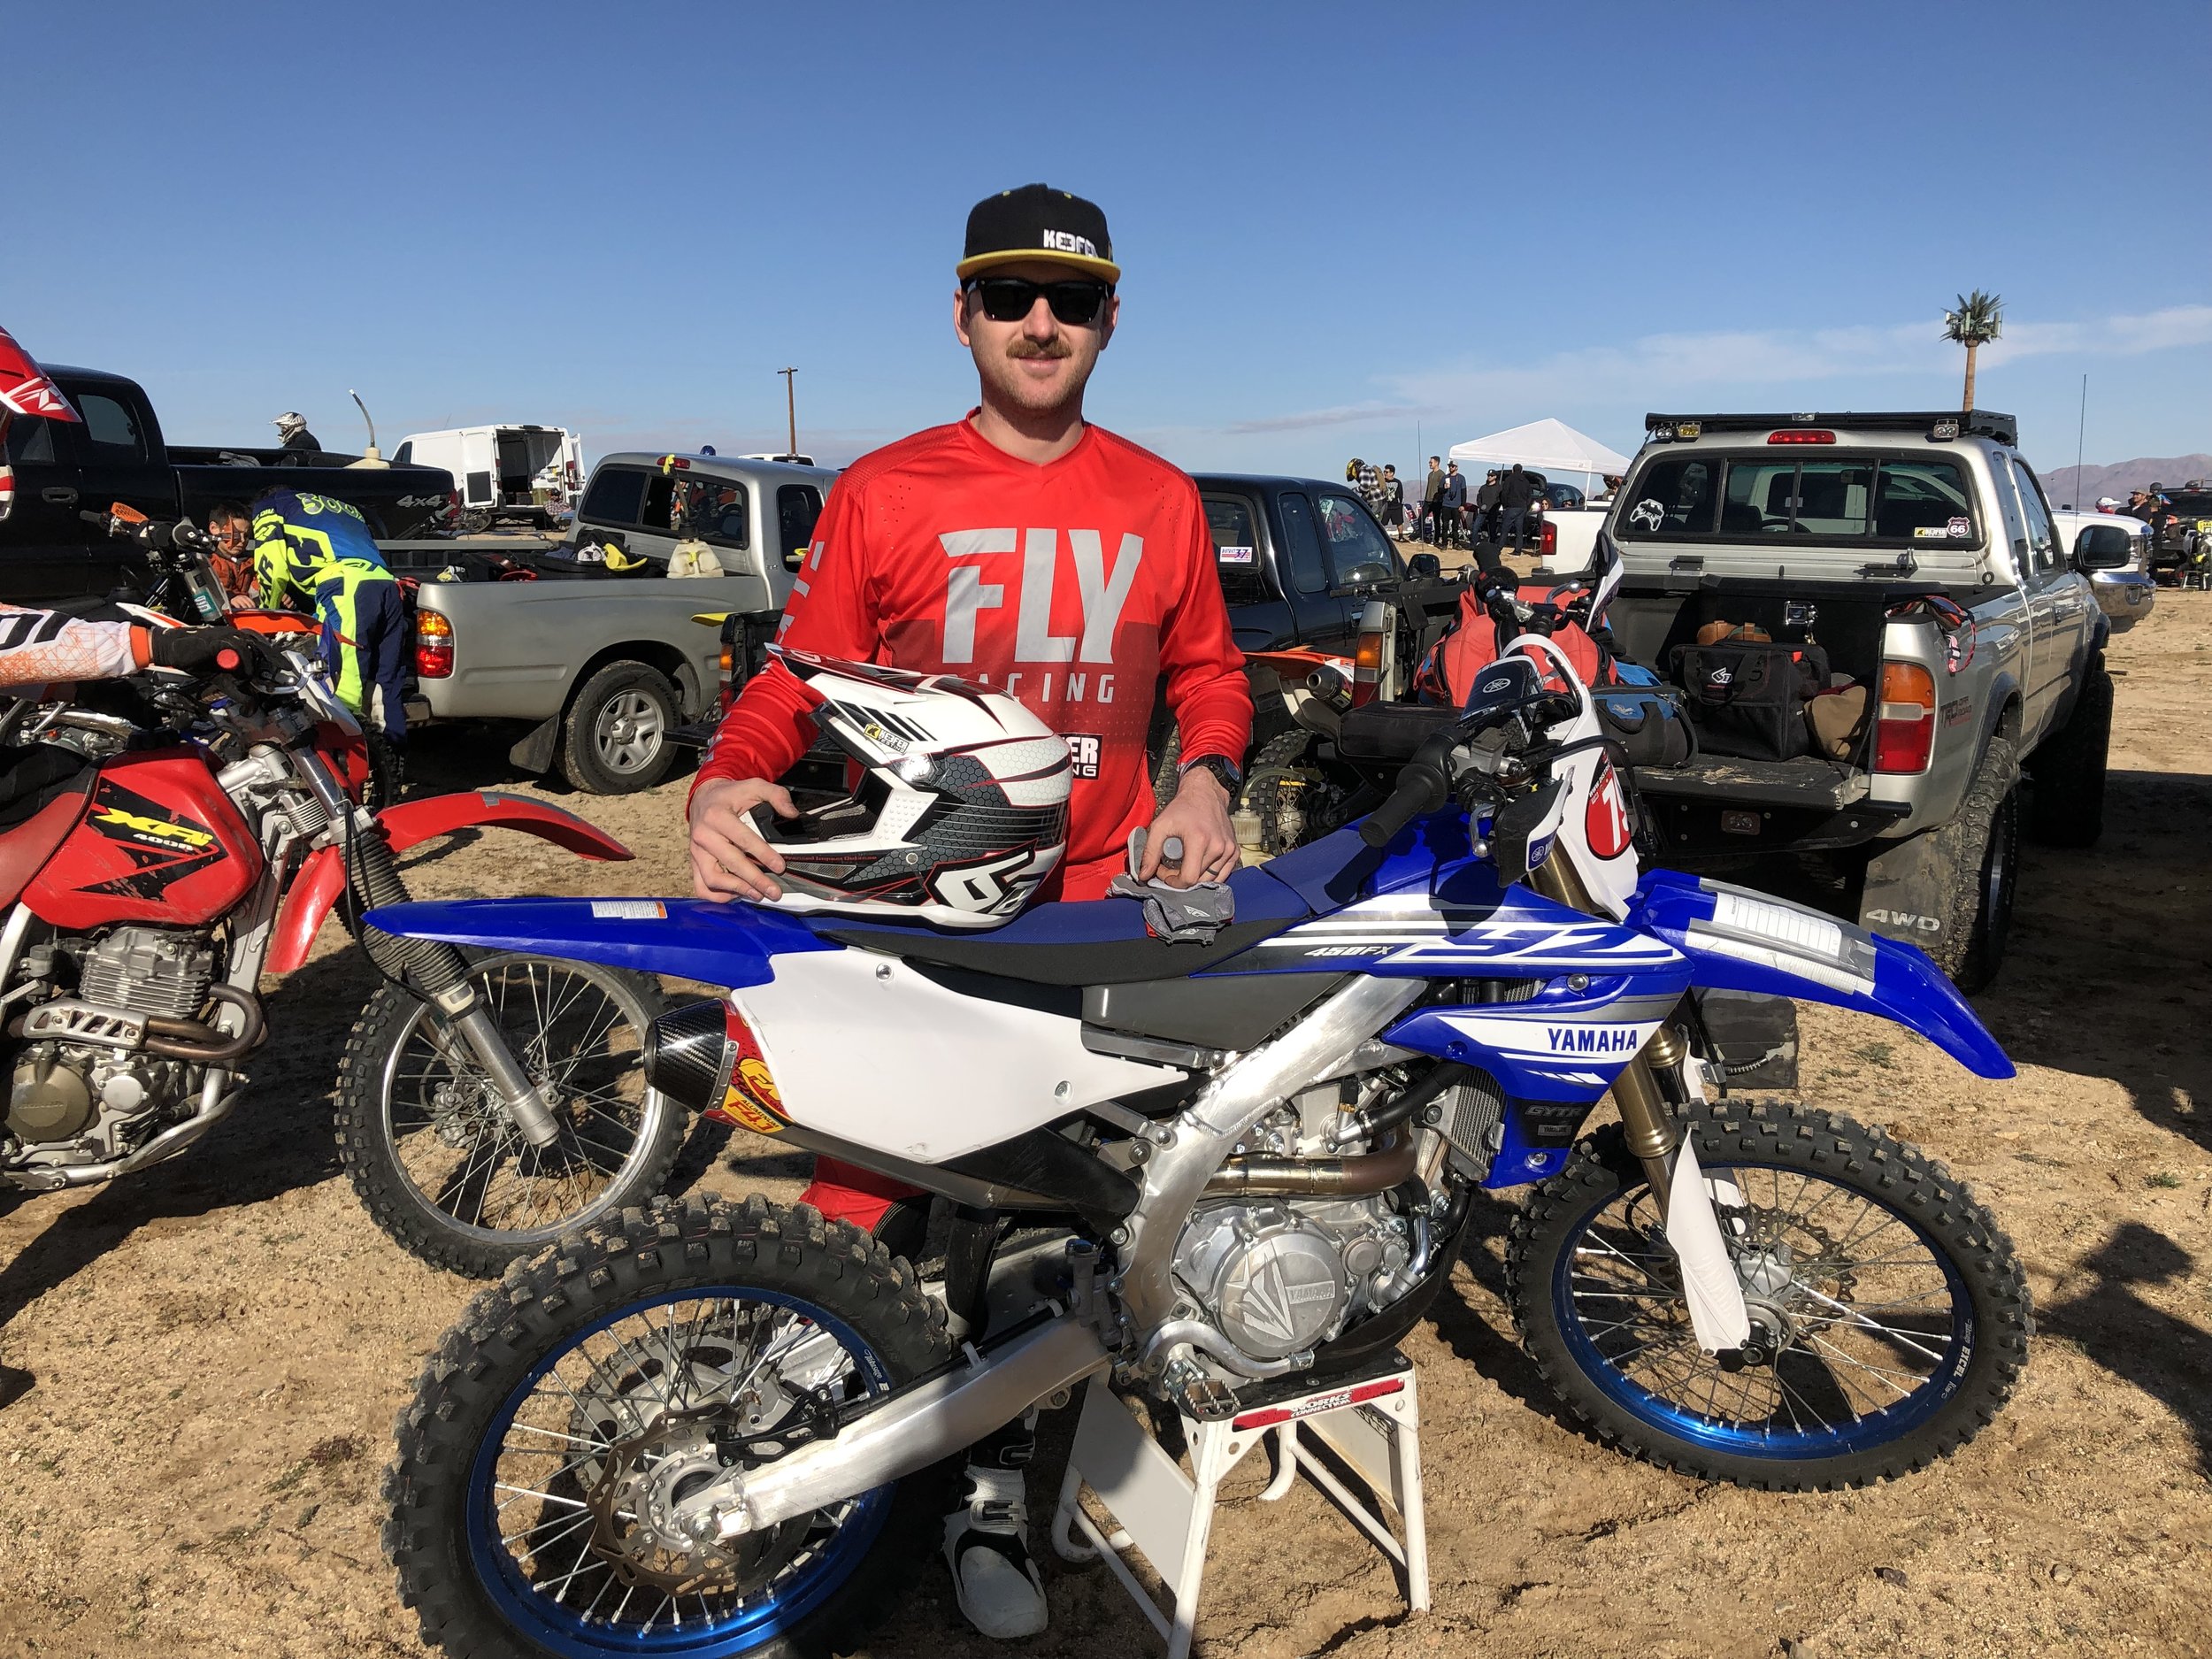 SATURDAY AT THE GLEN RACE REPORT: THE OLD GANG WAS BACK TOGETHER AGAIN -  Motocross Action Magazine